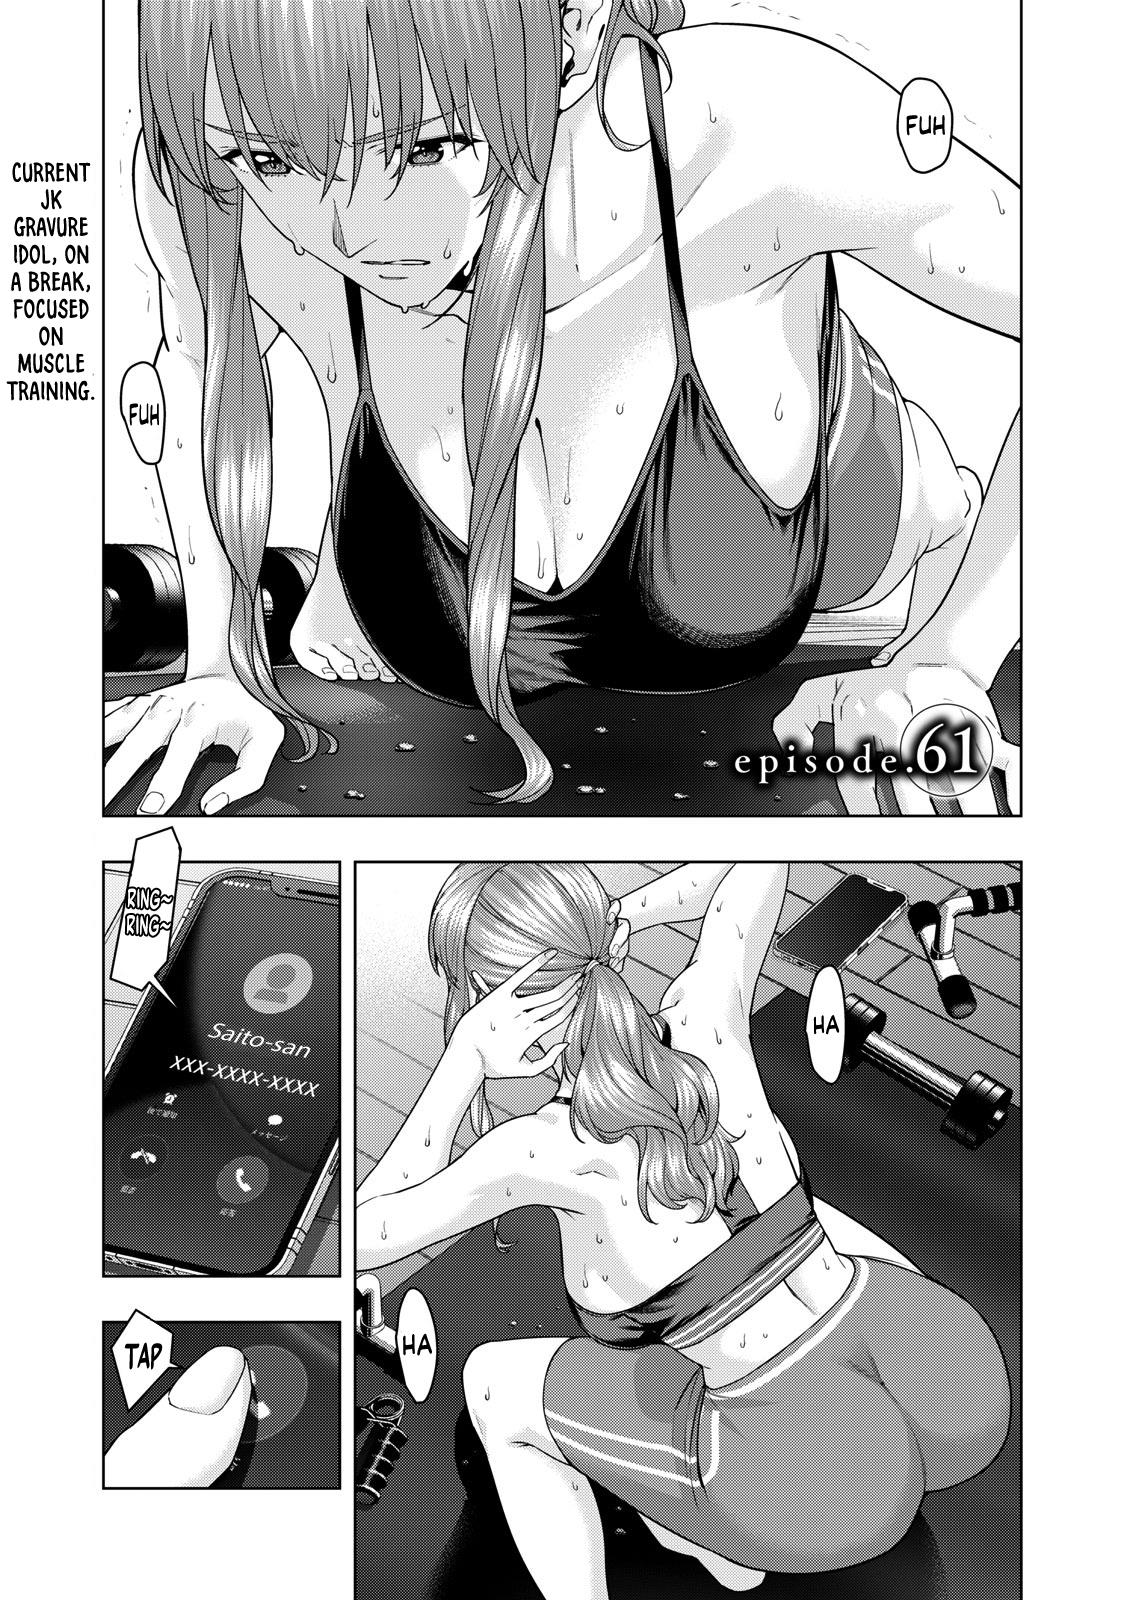 My Girlfriend's Friend Vol.4 Chapter 61 - Picture 2